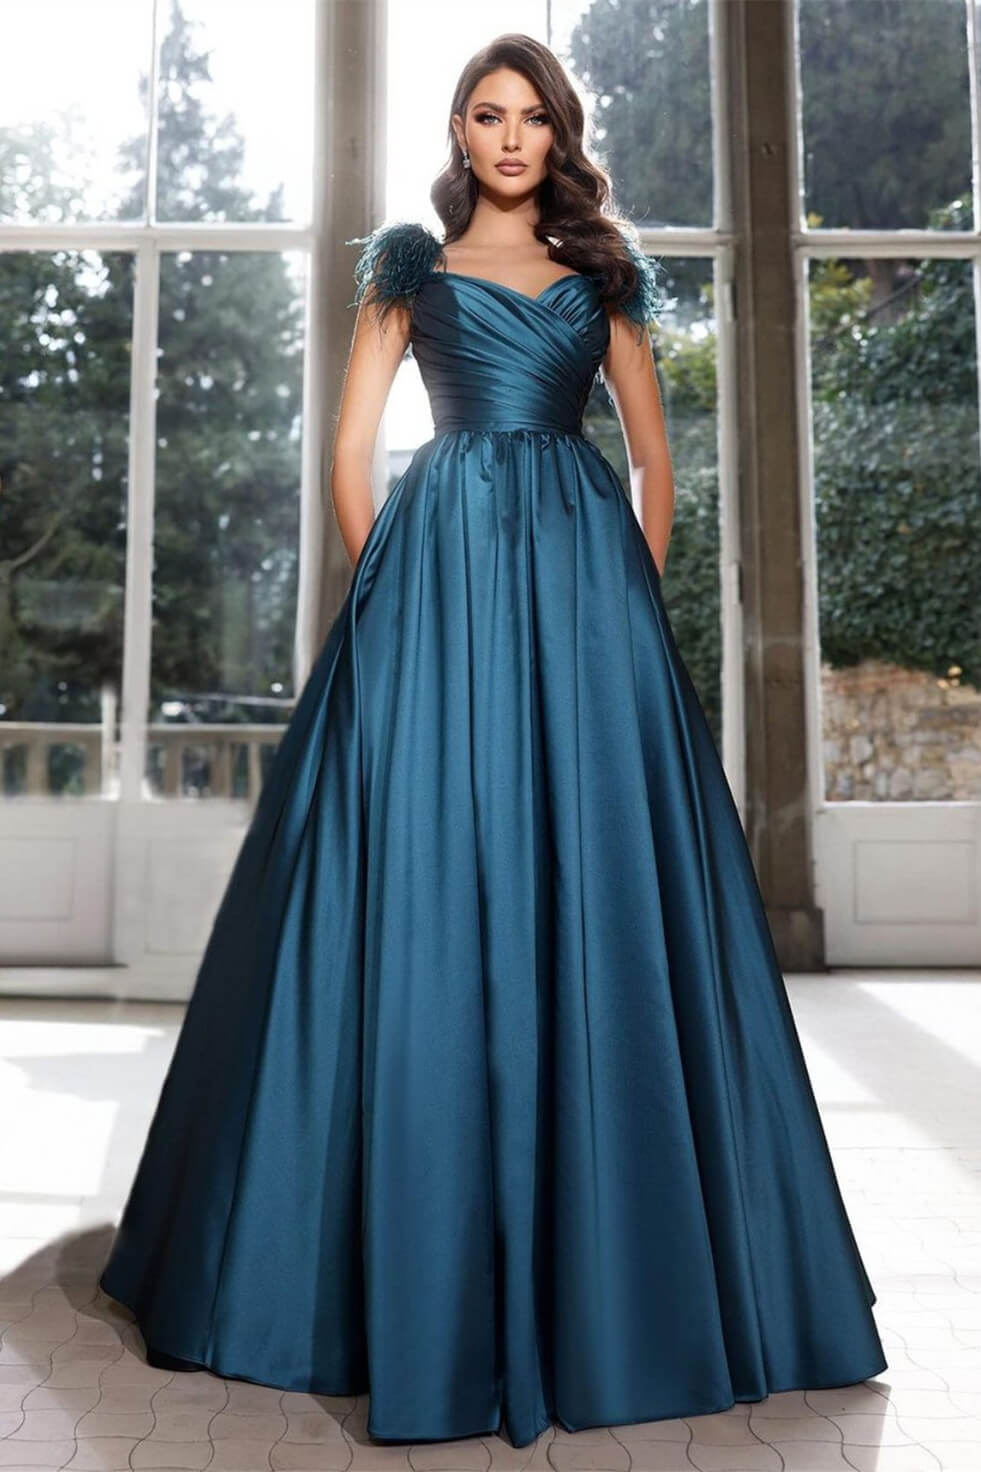 Bellasprom Ink Blue Strapless Long Prom Dress Sleeveless With Feathers Bellasprom